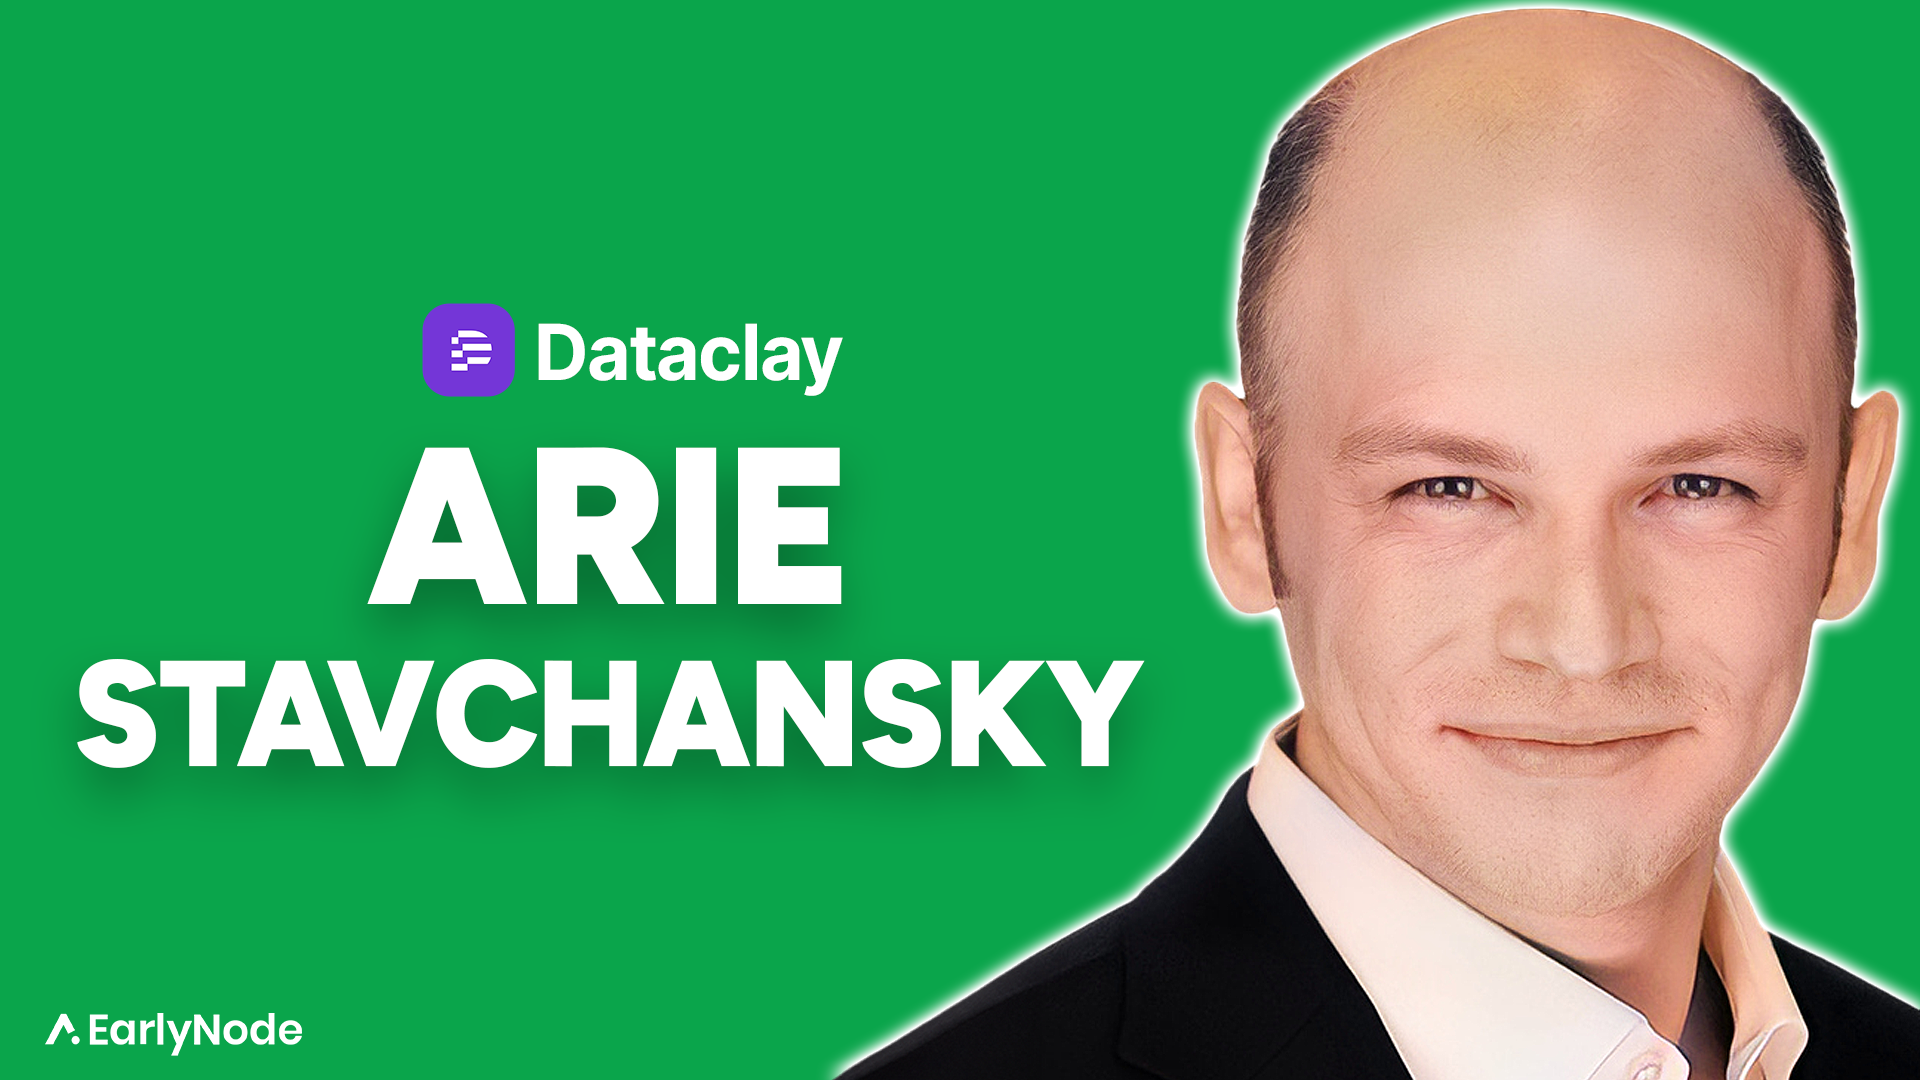 Data-Driven Content Creation with Arie Stavchansky (Founder of DataClay)